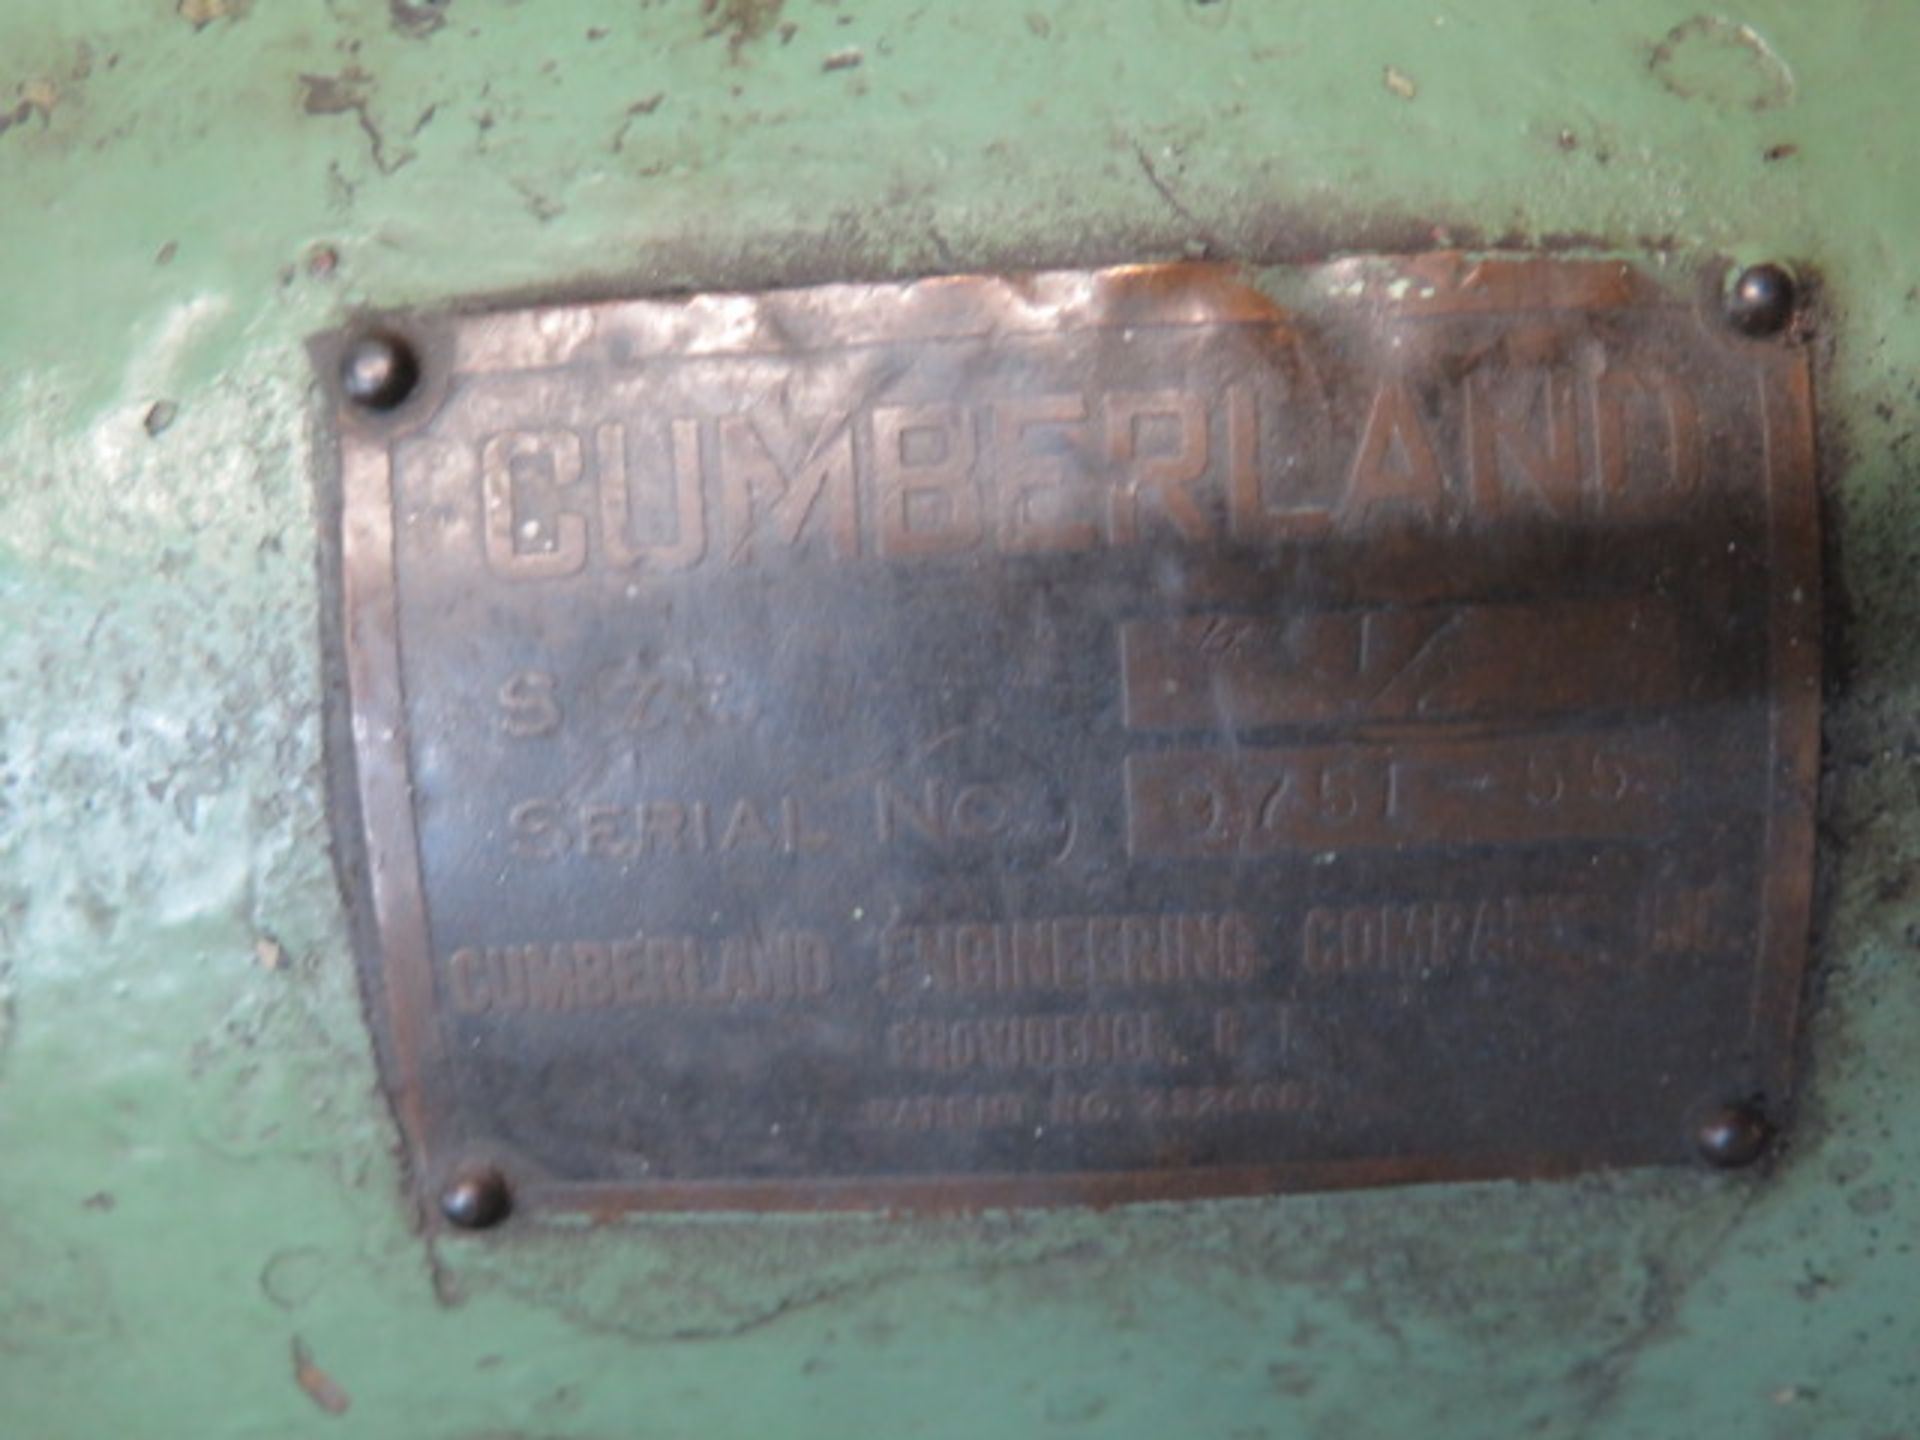 Cumberland Size # ½ 8” Plastics Granulator s/n 9751-55 (SOLD AS-IS - NO WARRANTY) - Image 6 of 6